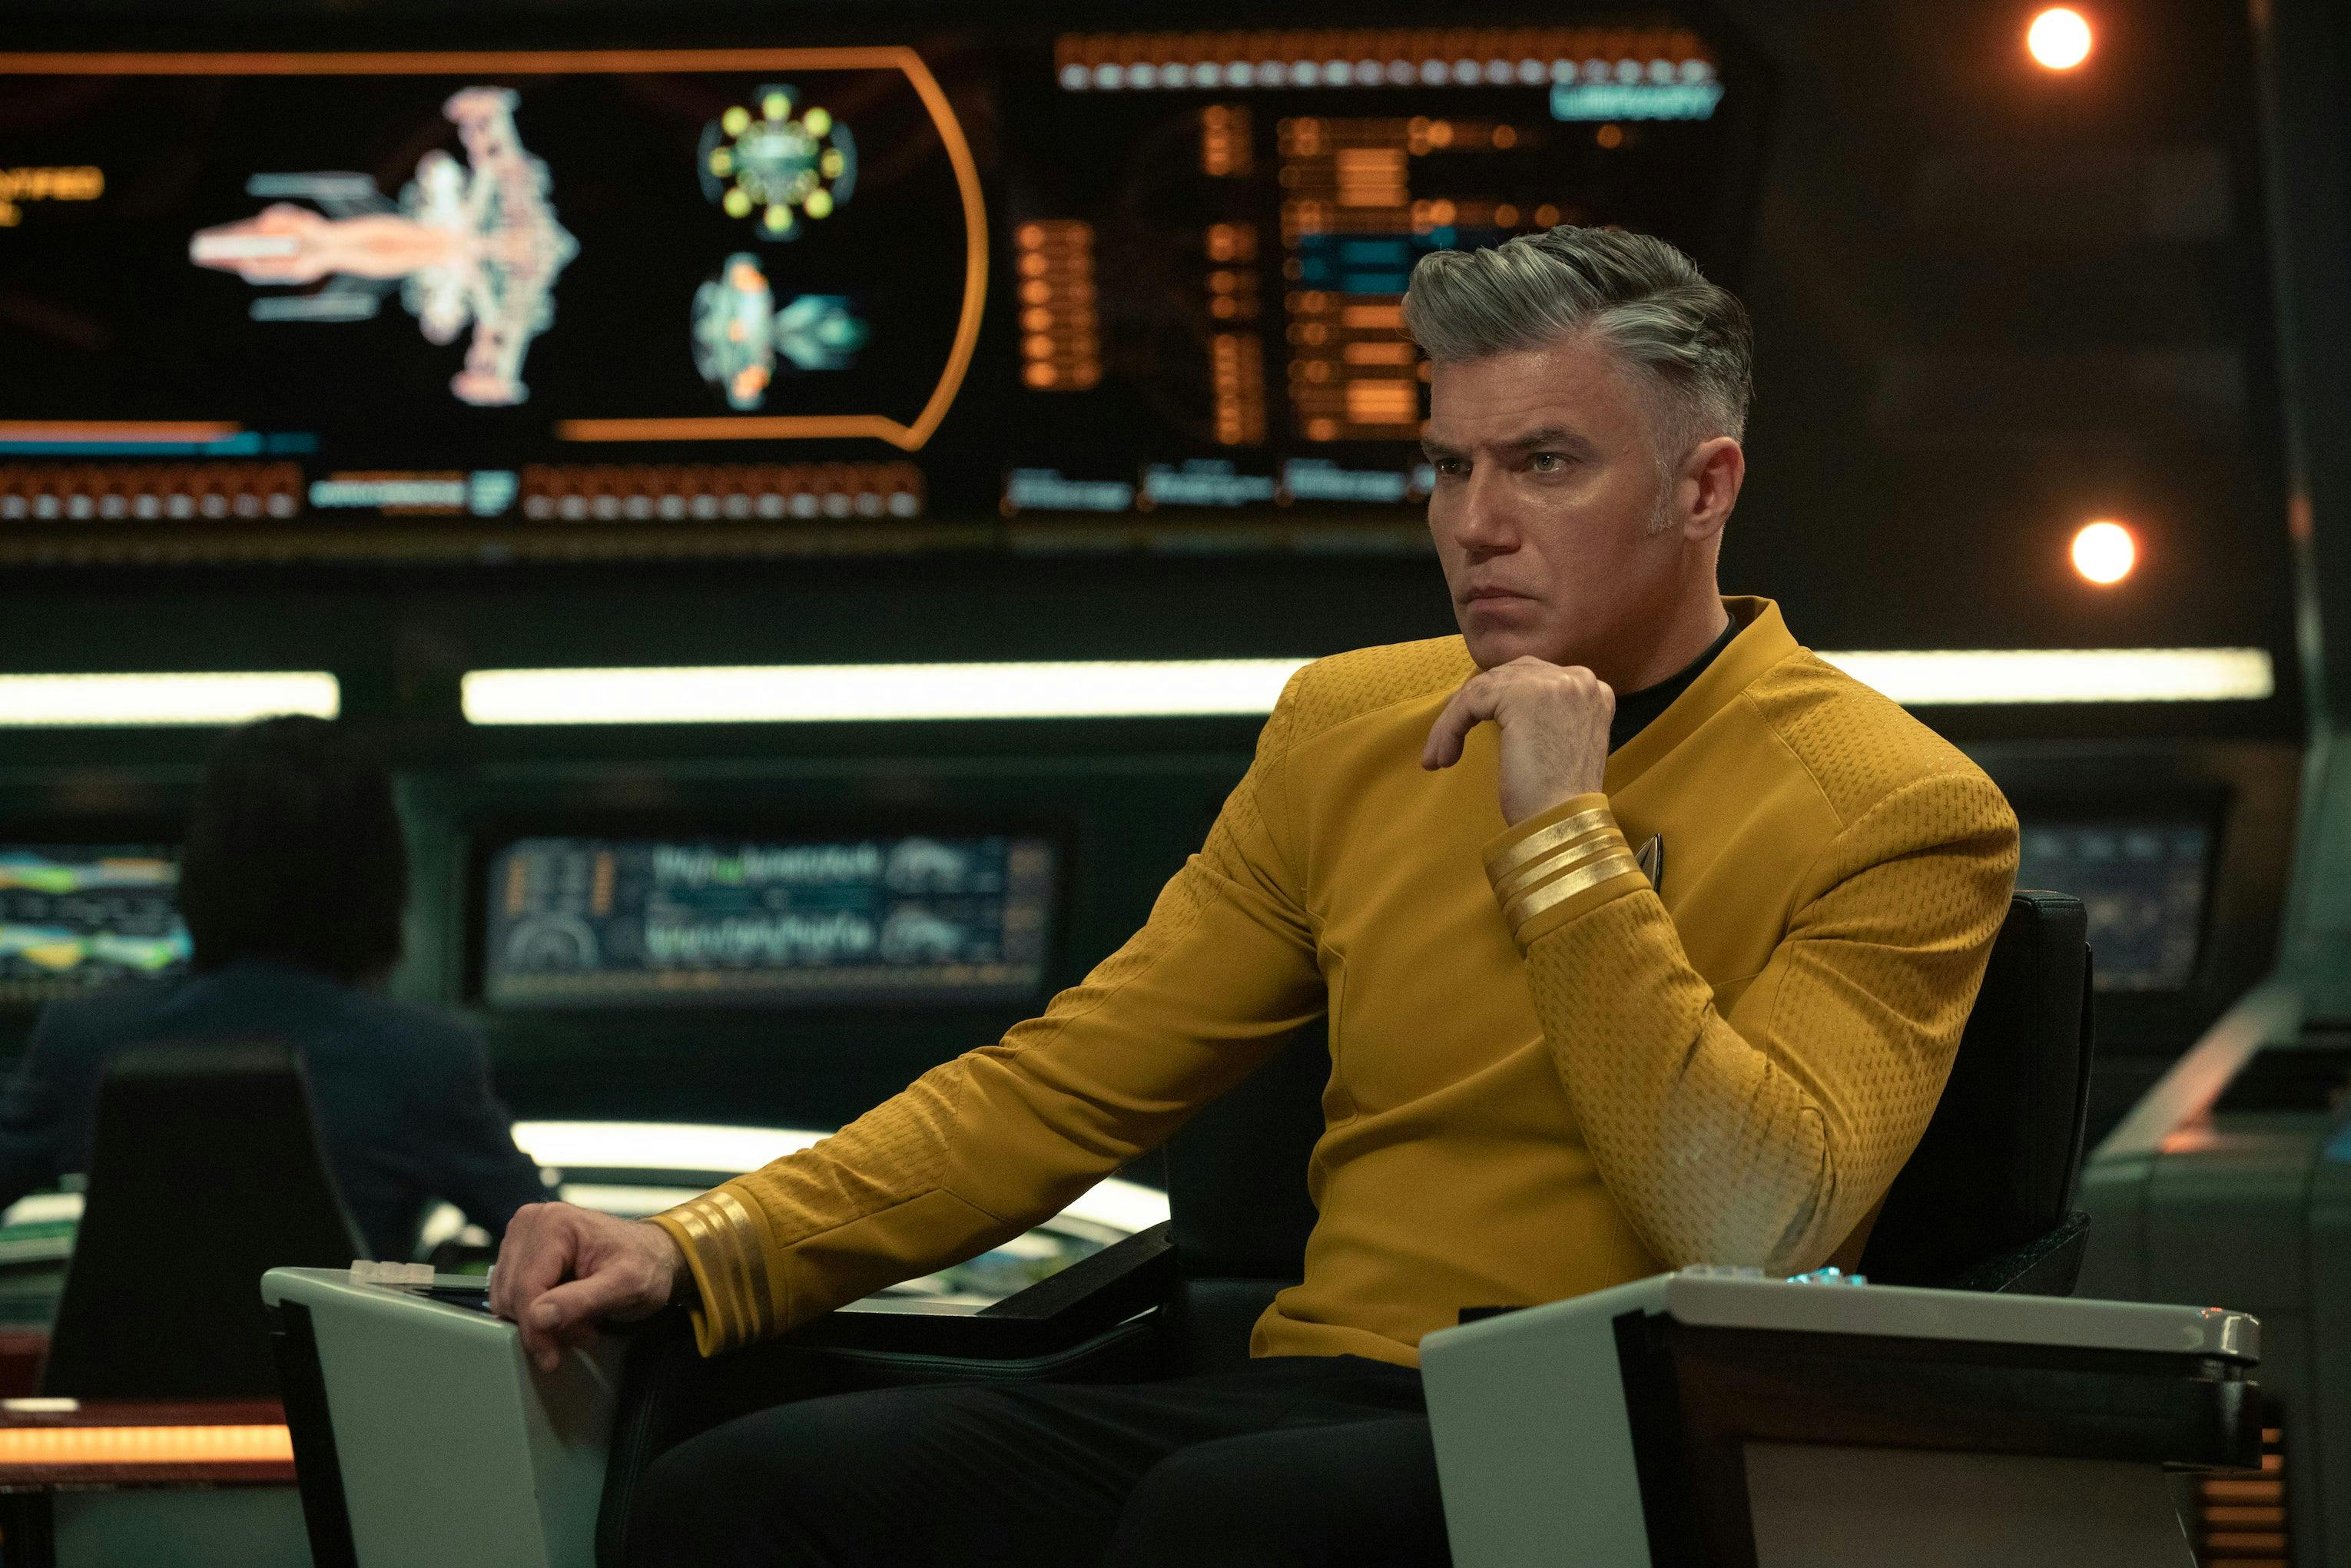 A focused Christopher Pike sits in the captain's chair on the bridge and rests his chin on his left hand